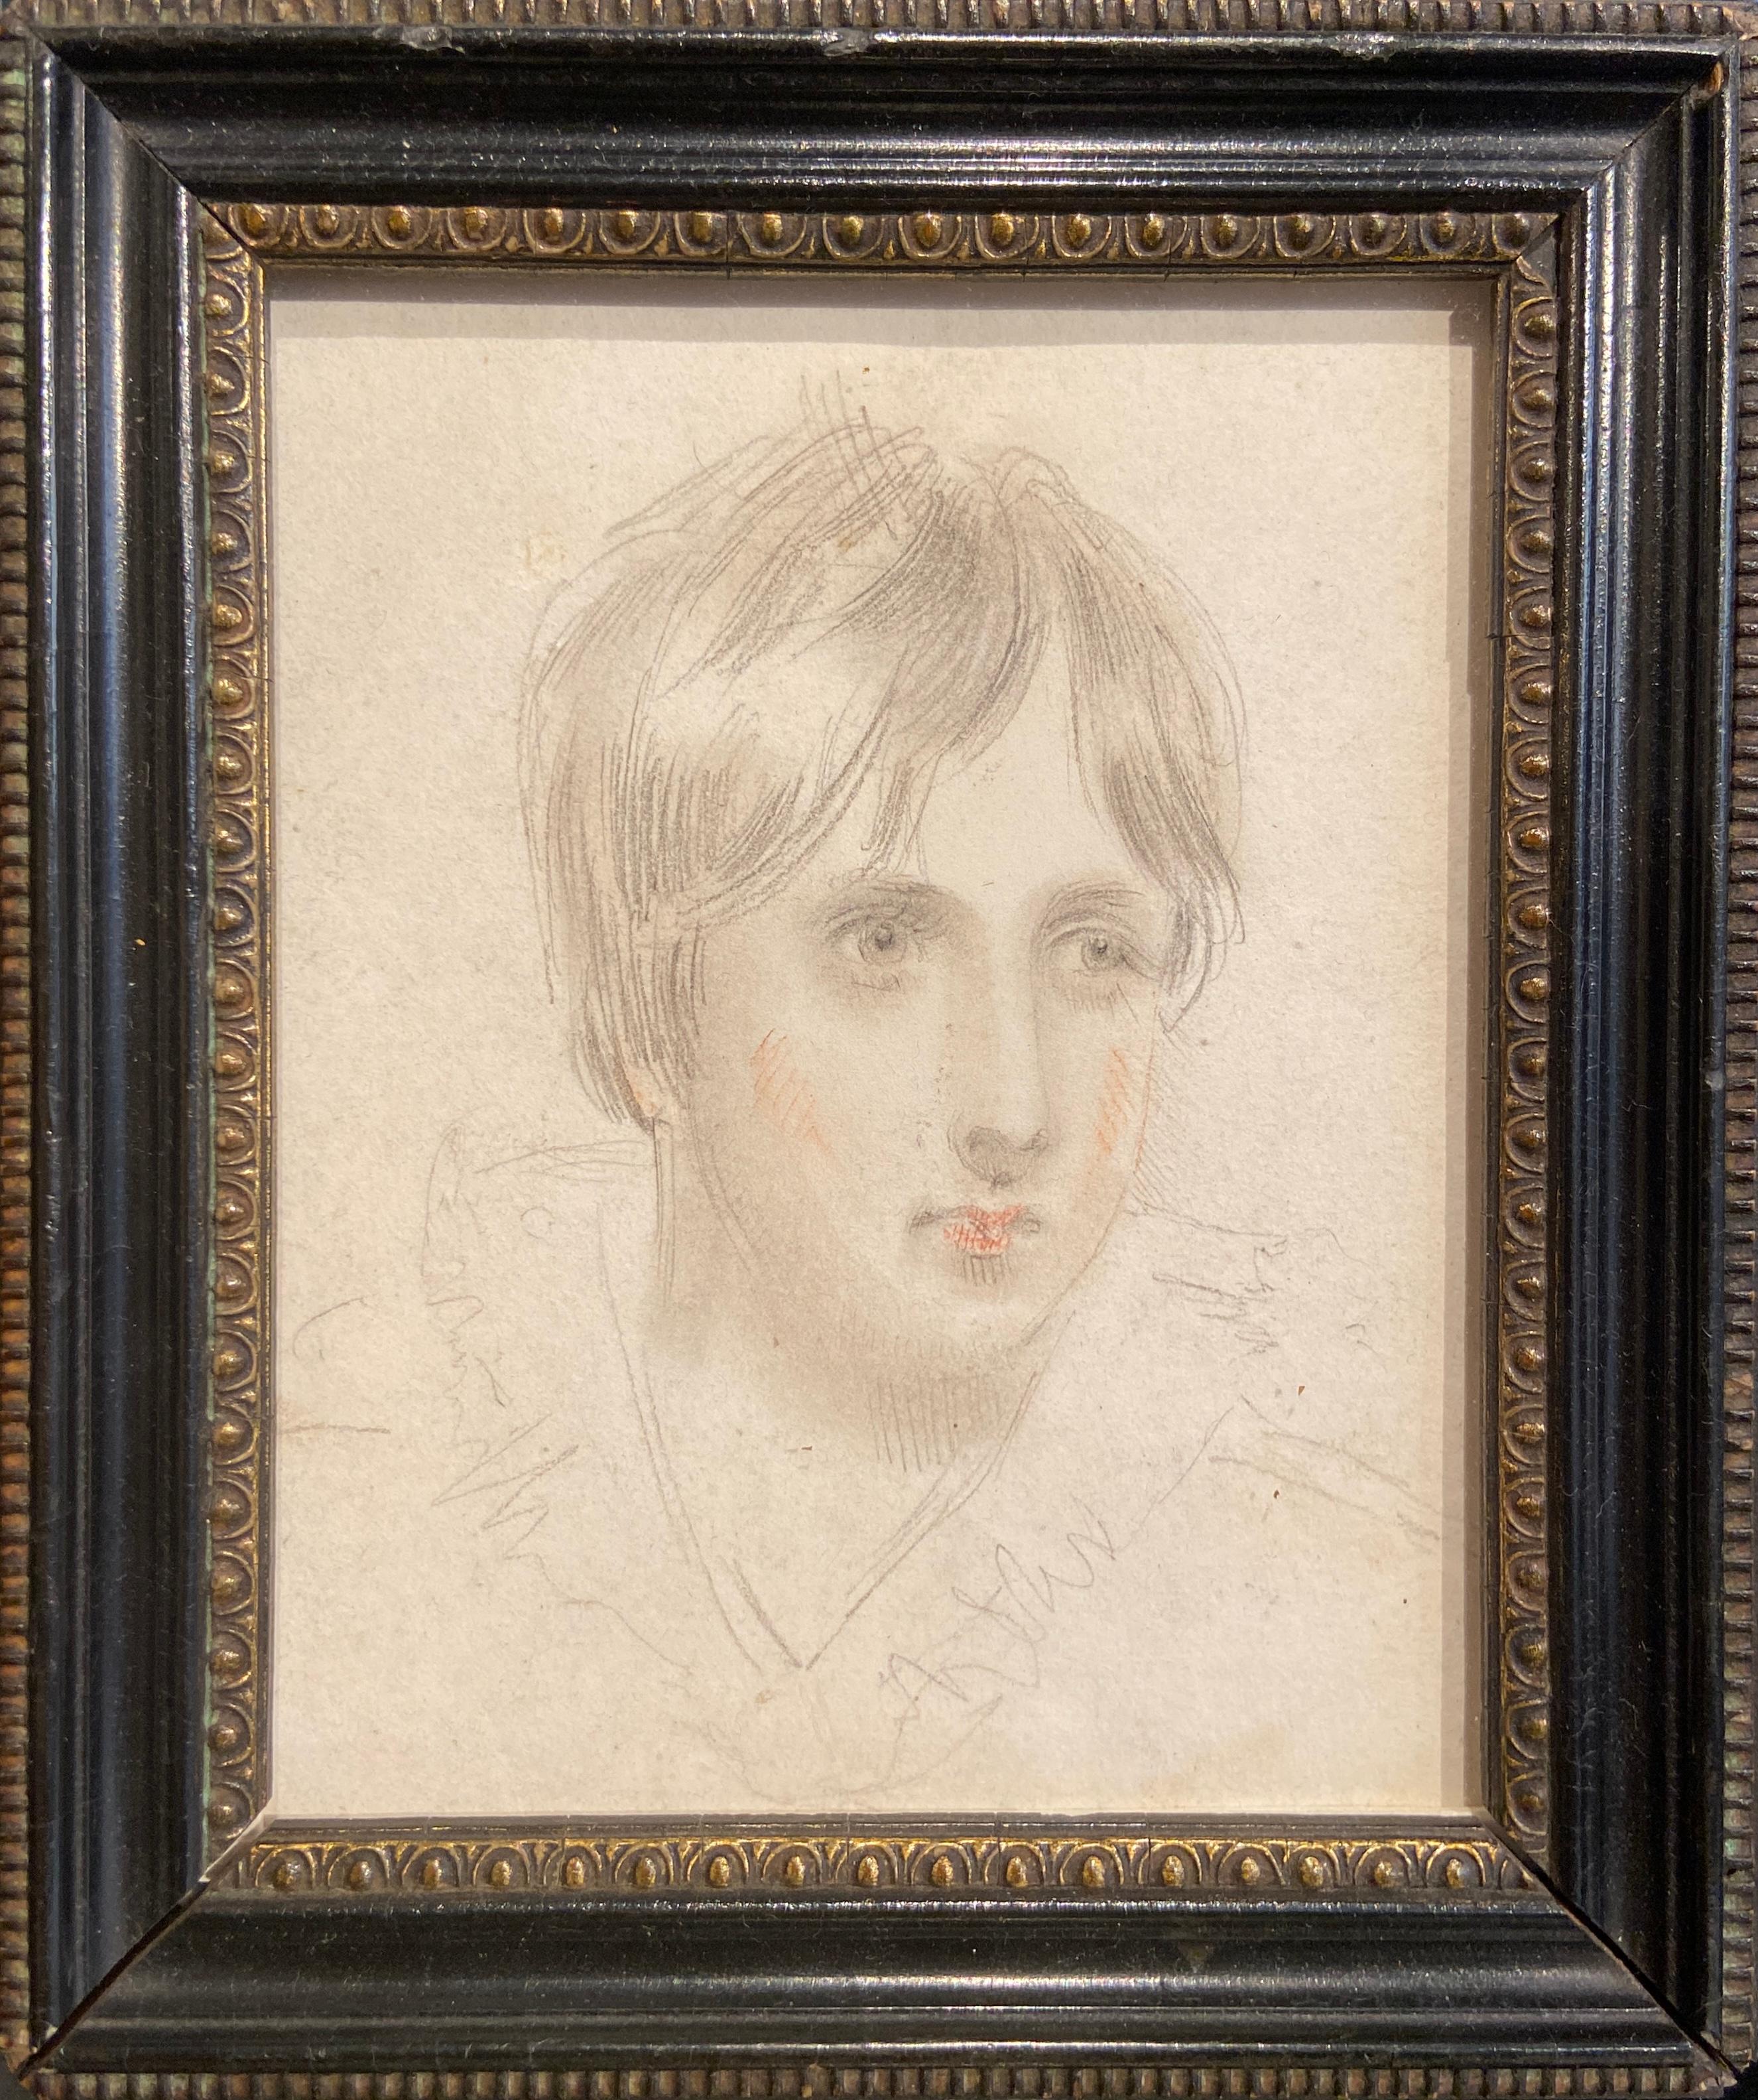 Portrait of a Young Man, Early 19th Century English Graphite Sketch  - Naturalistic Art by 19th Century English School